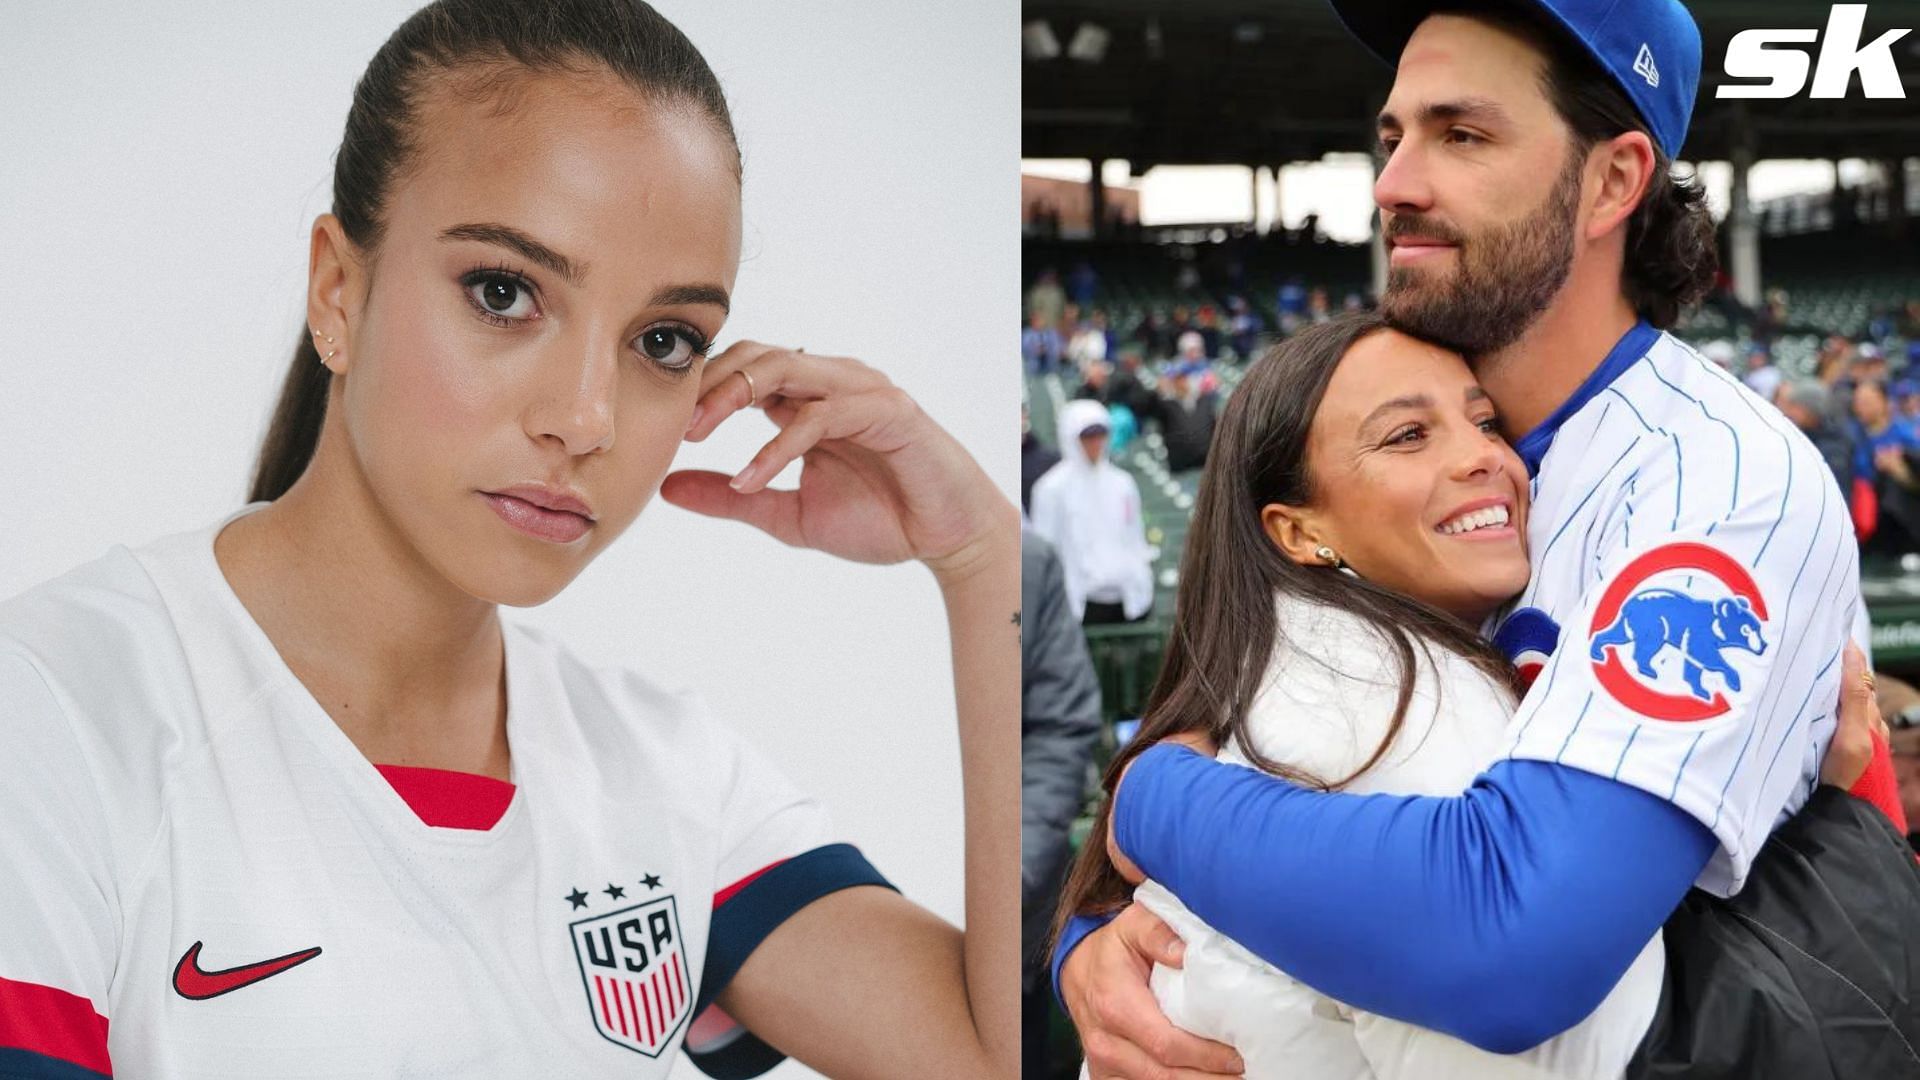 Mallory Pugh and Dansby Swanson, the sports power couple